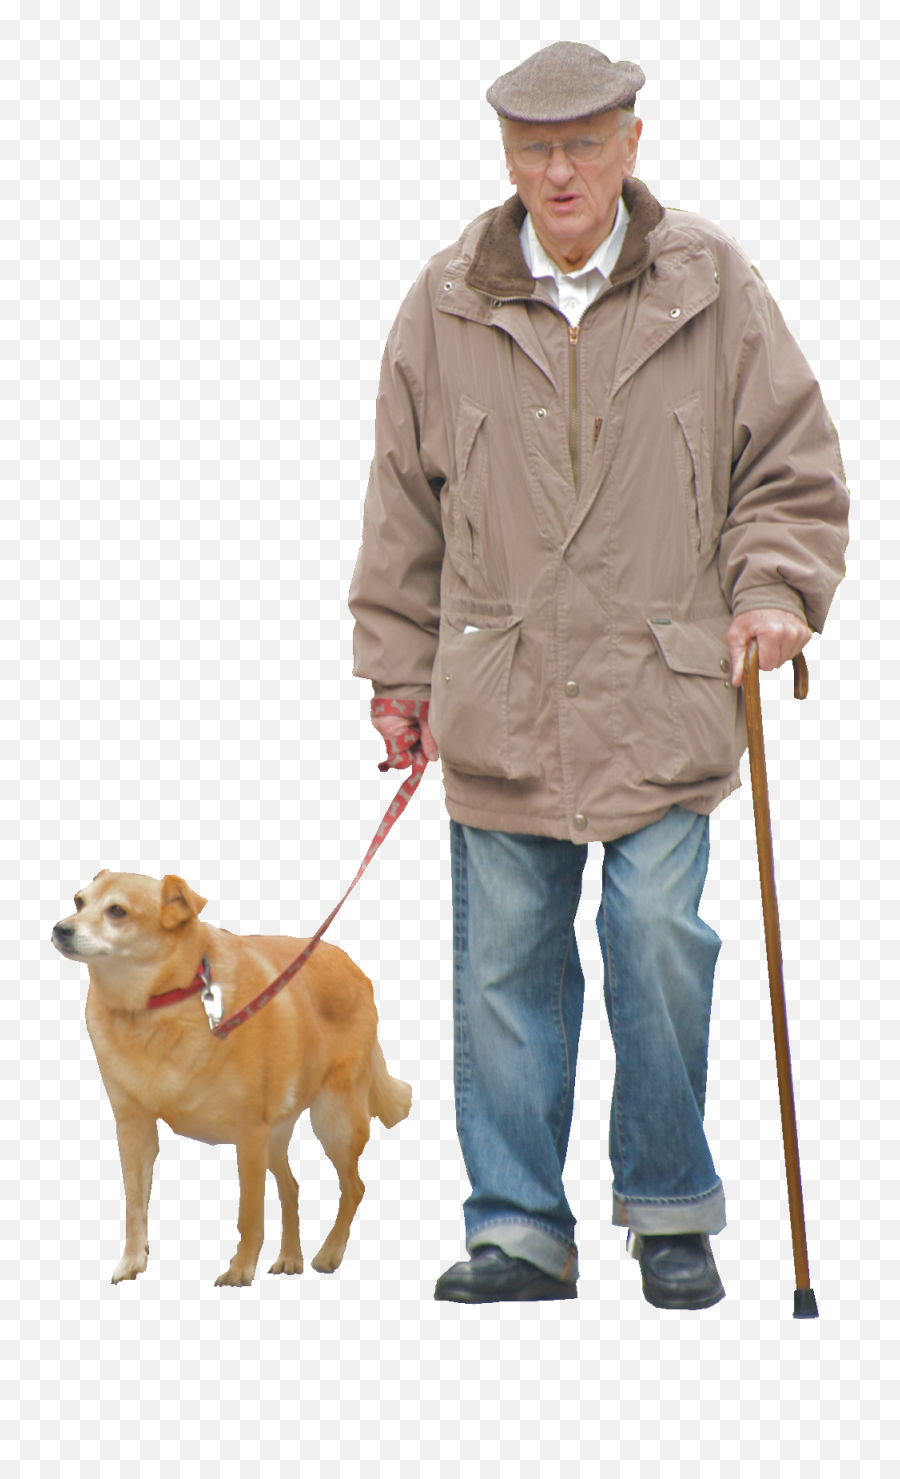 Download - Manpngpicture Free Transparent Png Images Man And Dog Png,Sheamus Png